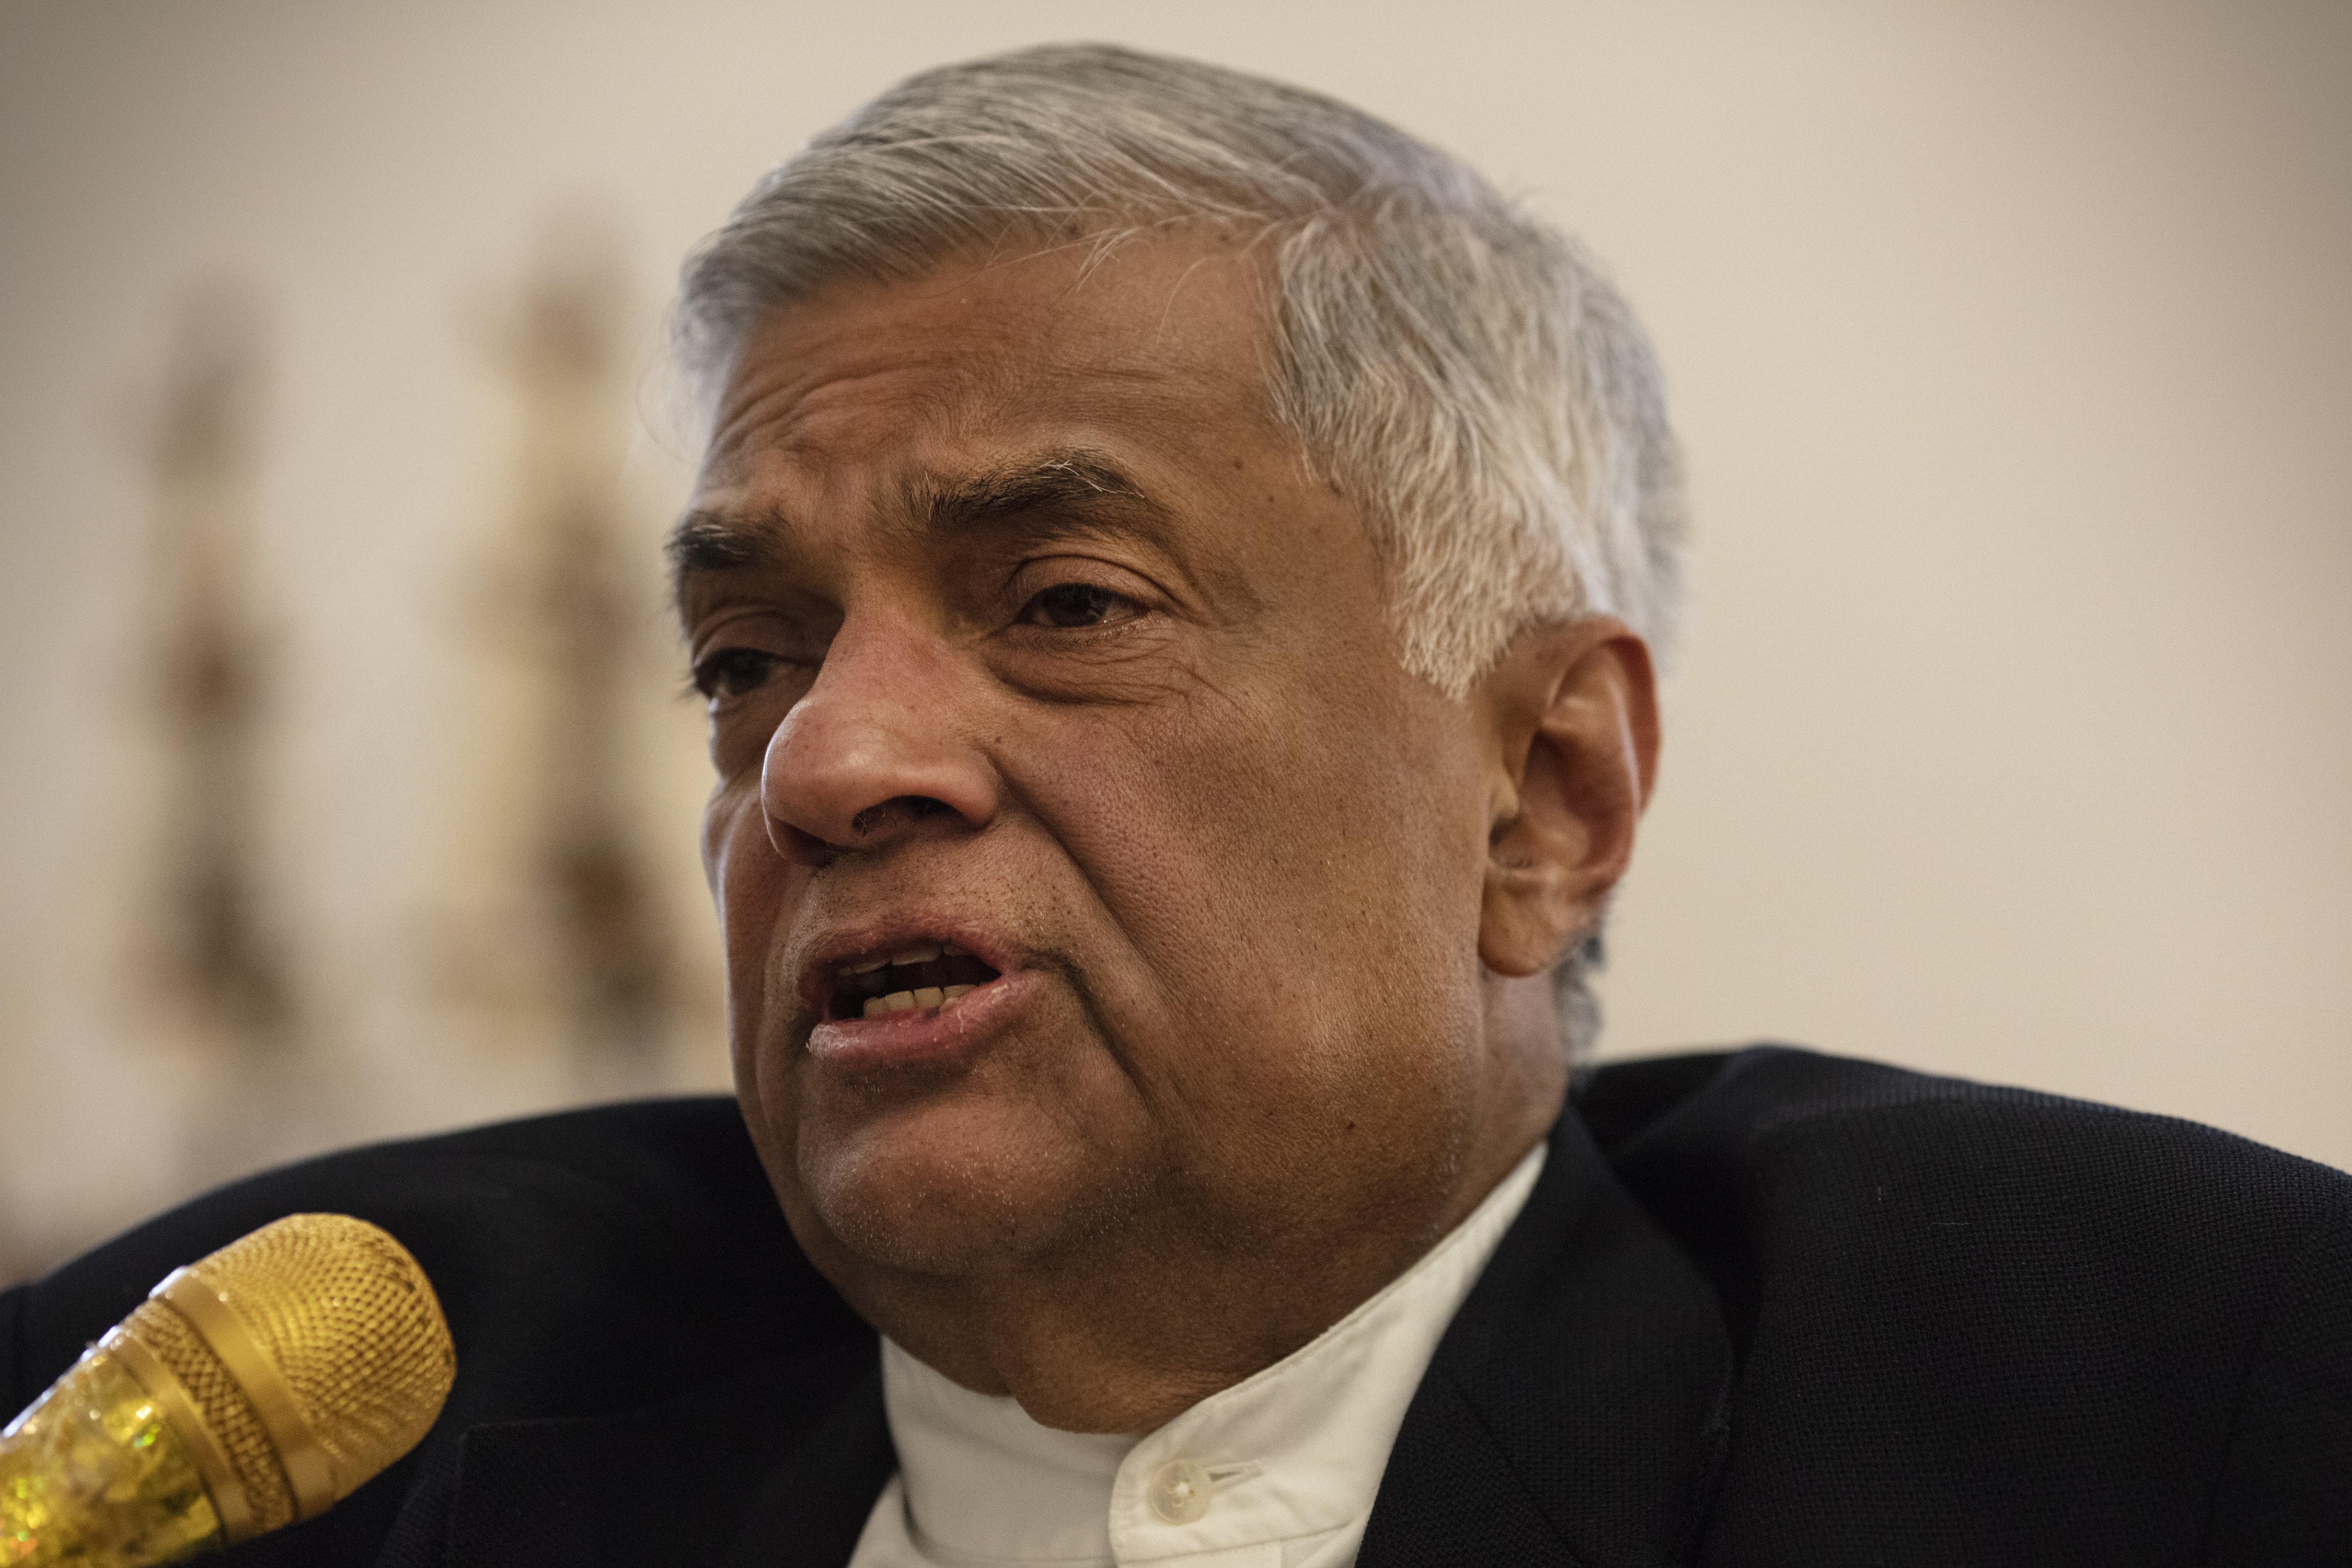 Sri Lanka Prime Minister Ranil Wickremesinghe at his office | Photo: Getty Images